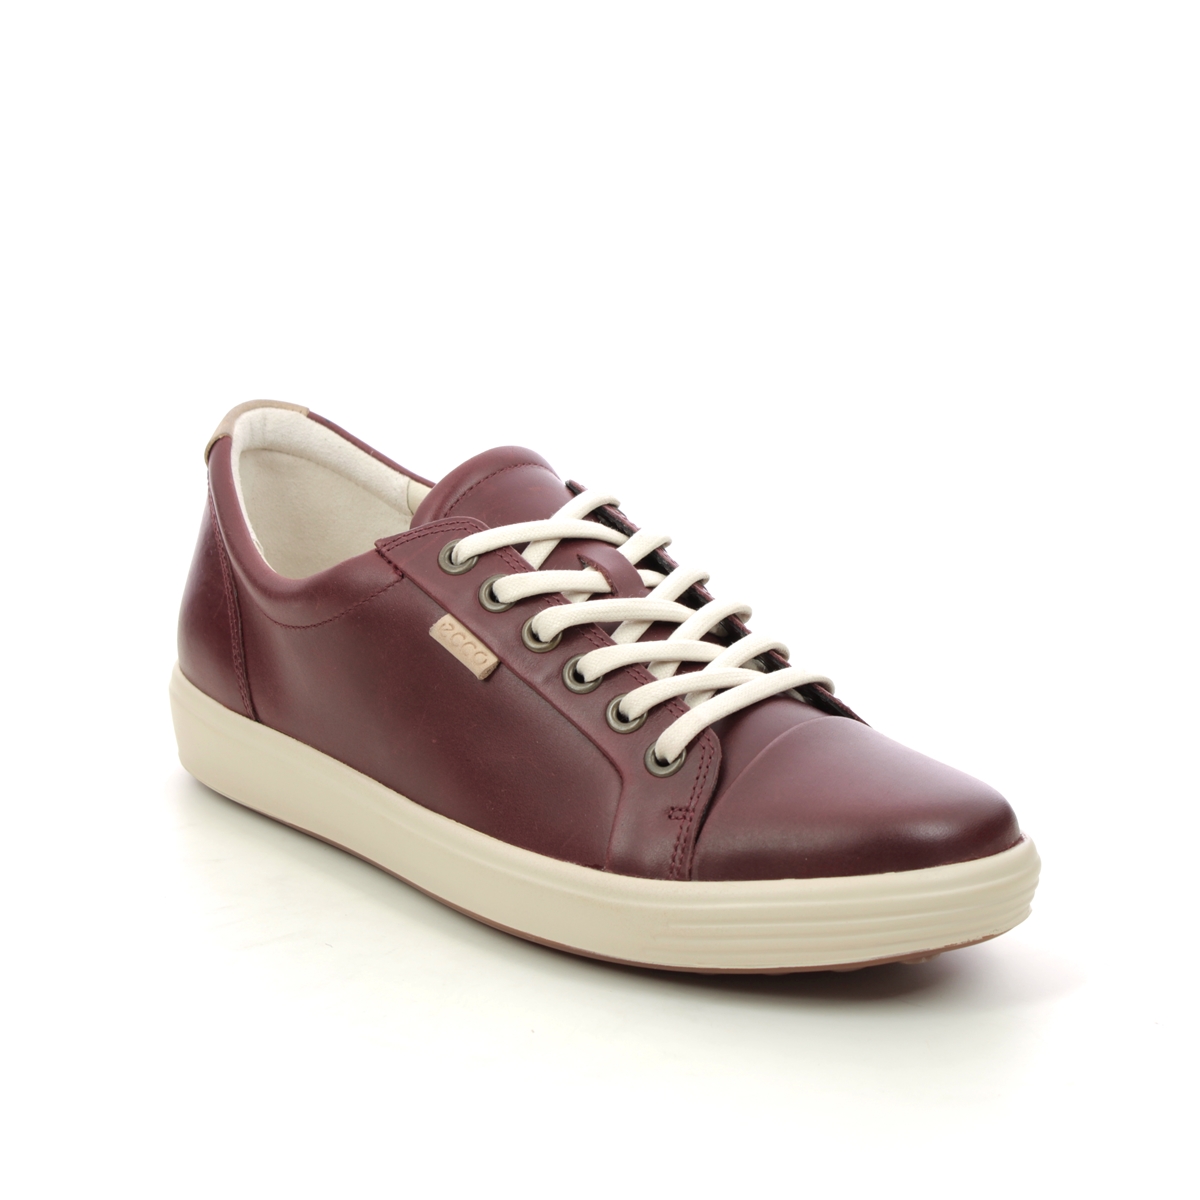 Ecco Soft 7 Lace Plum Womens Trainers 430003-01588 In Size 40 In Plain Plum